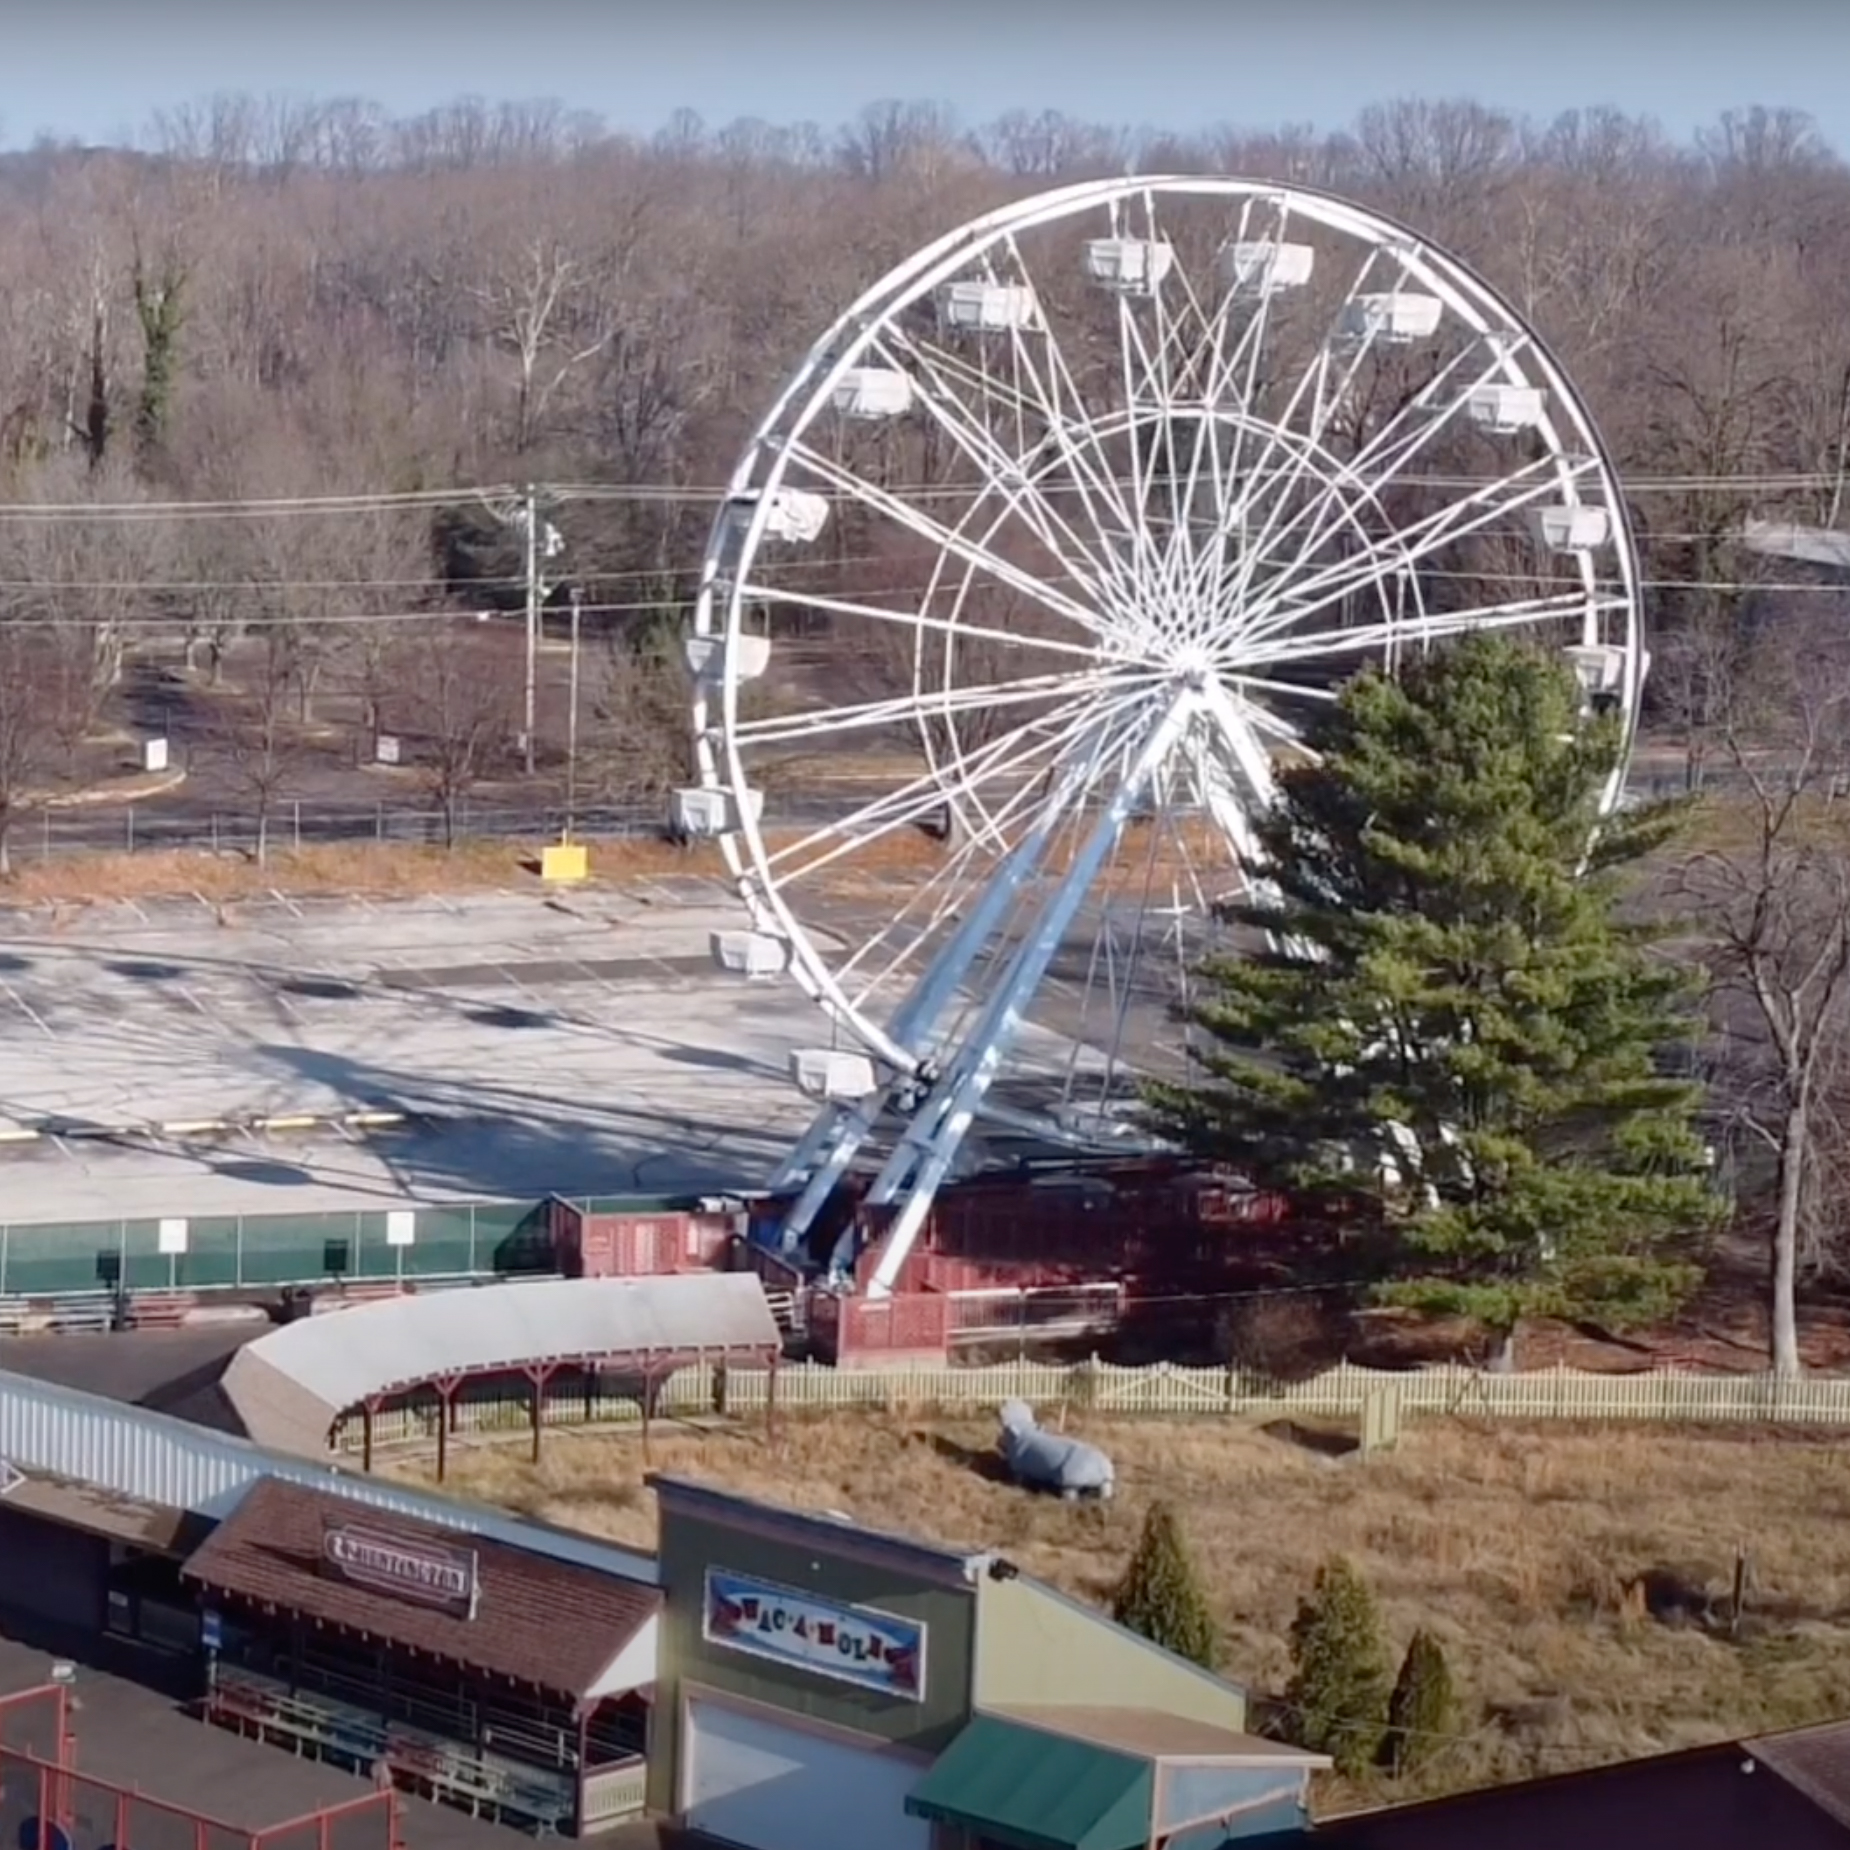 At New Jersey amusement park, vintage ride turns 80